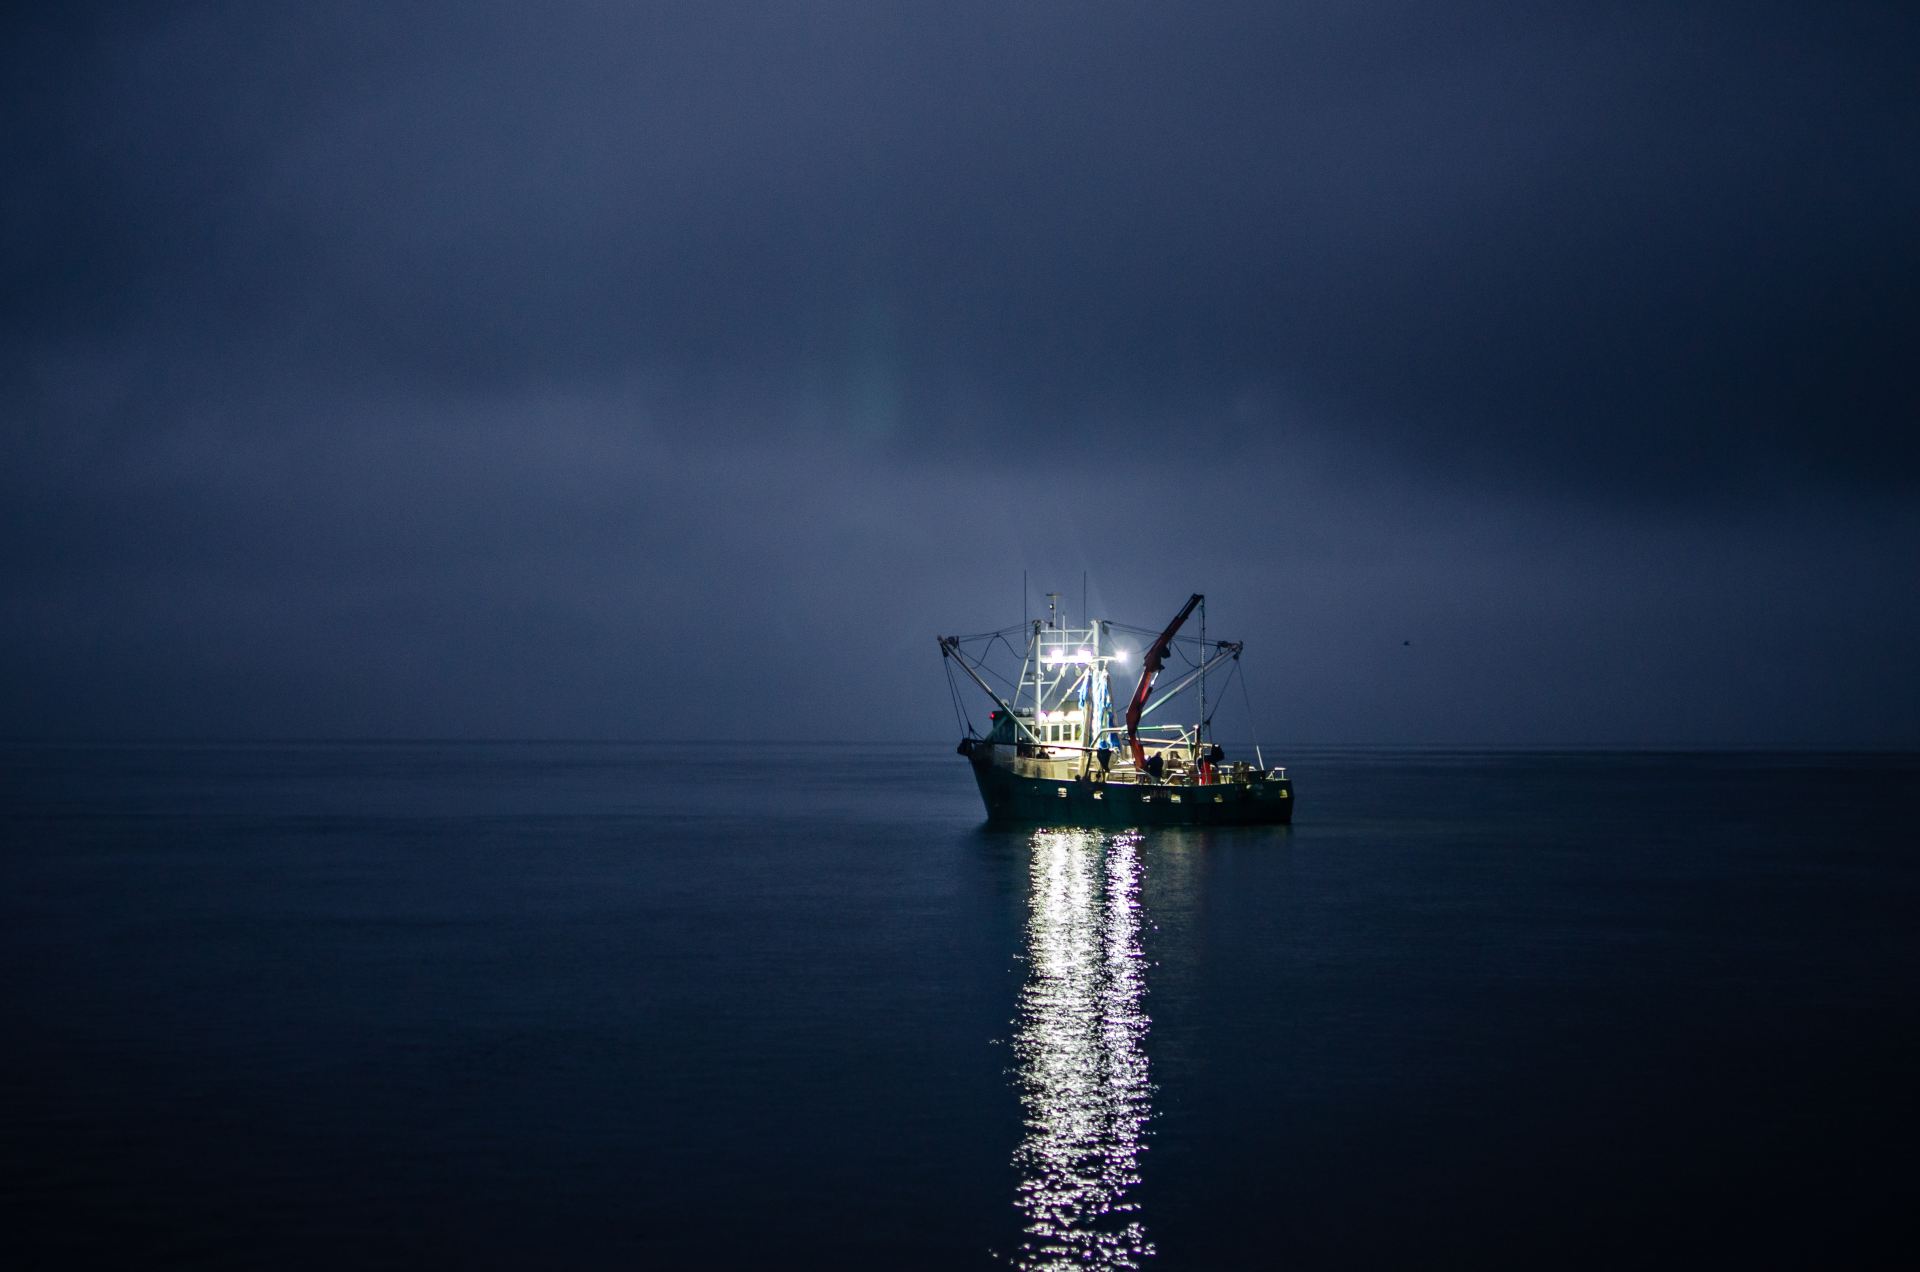 Trawler Fishing boat in the middle of the ocean at night